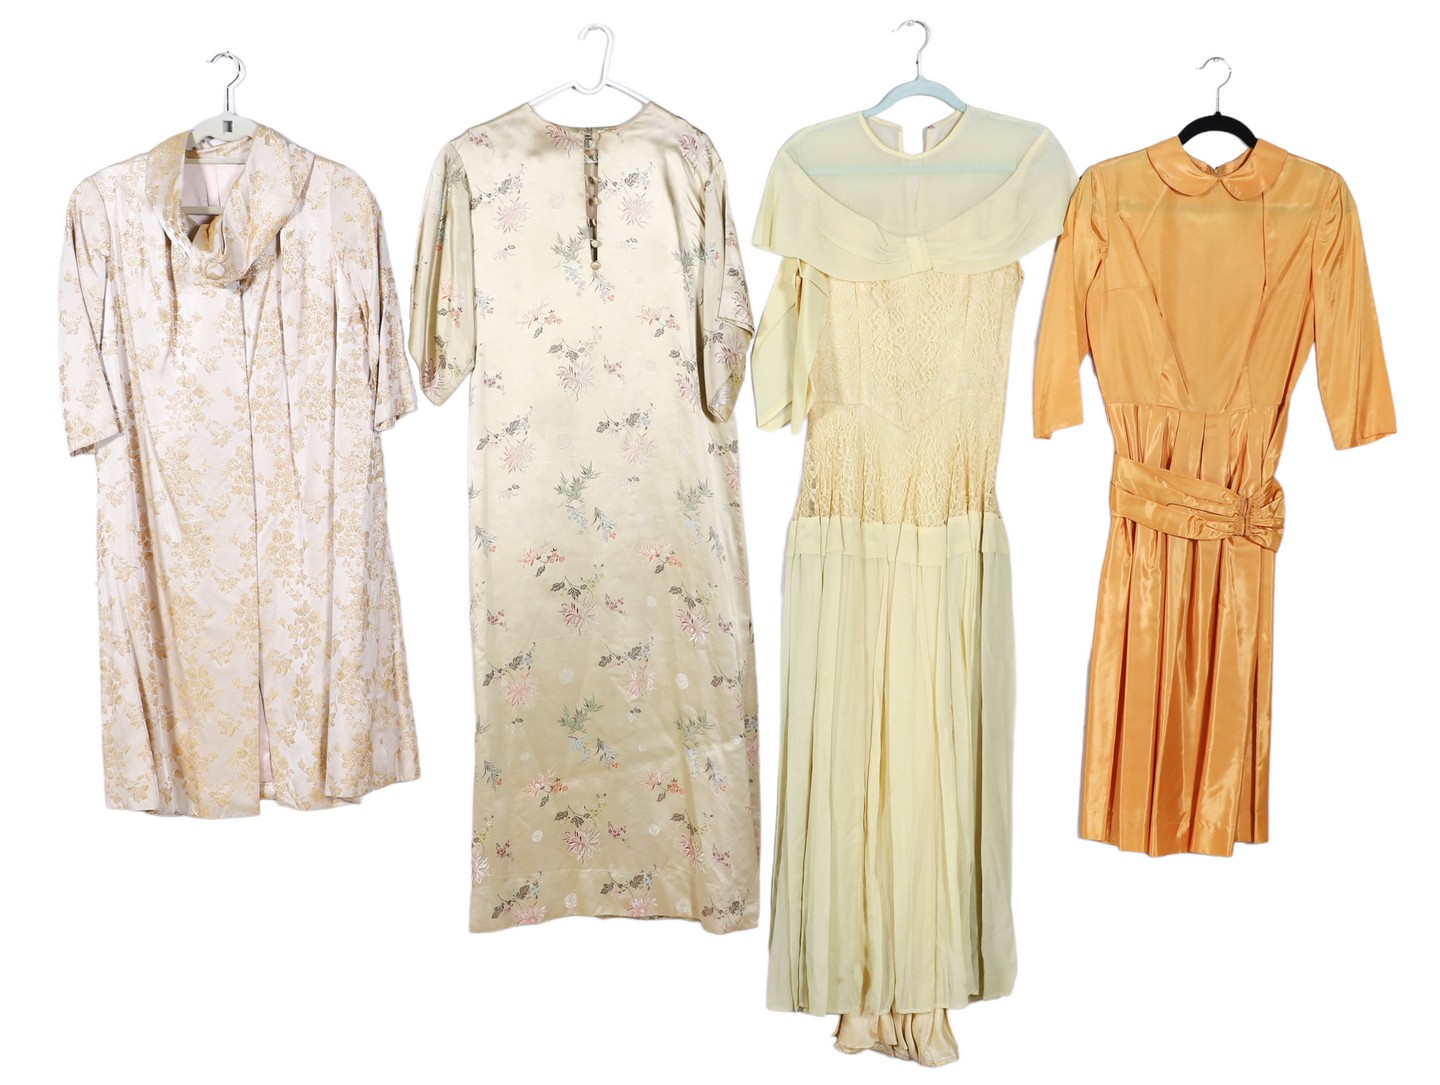  4 1940 s 50 s dresses to include 317d90